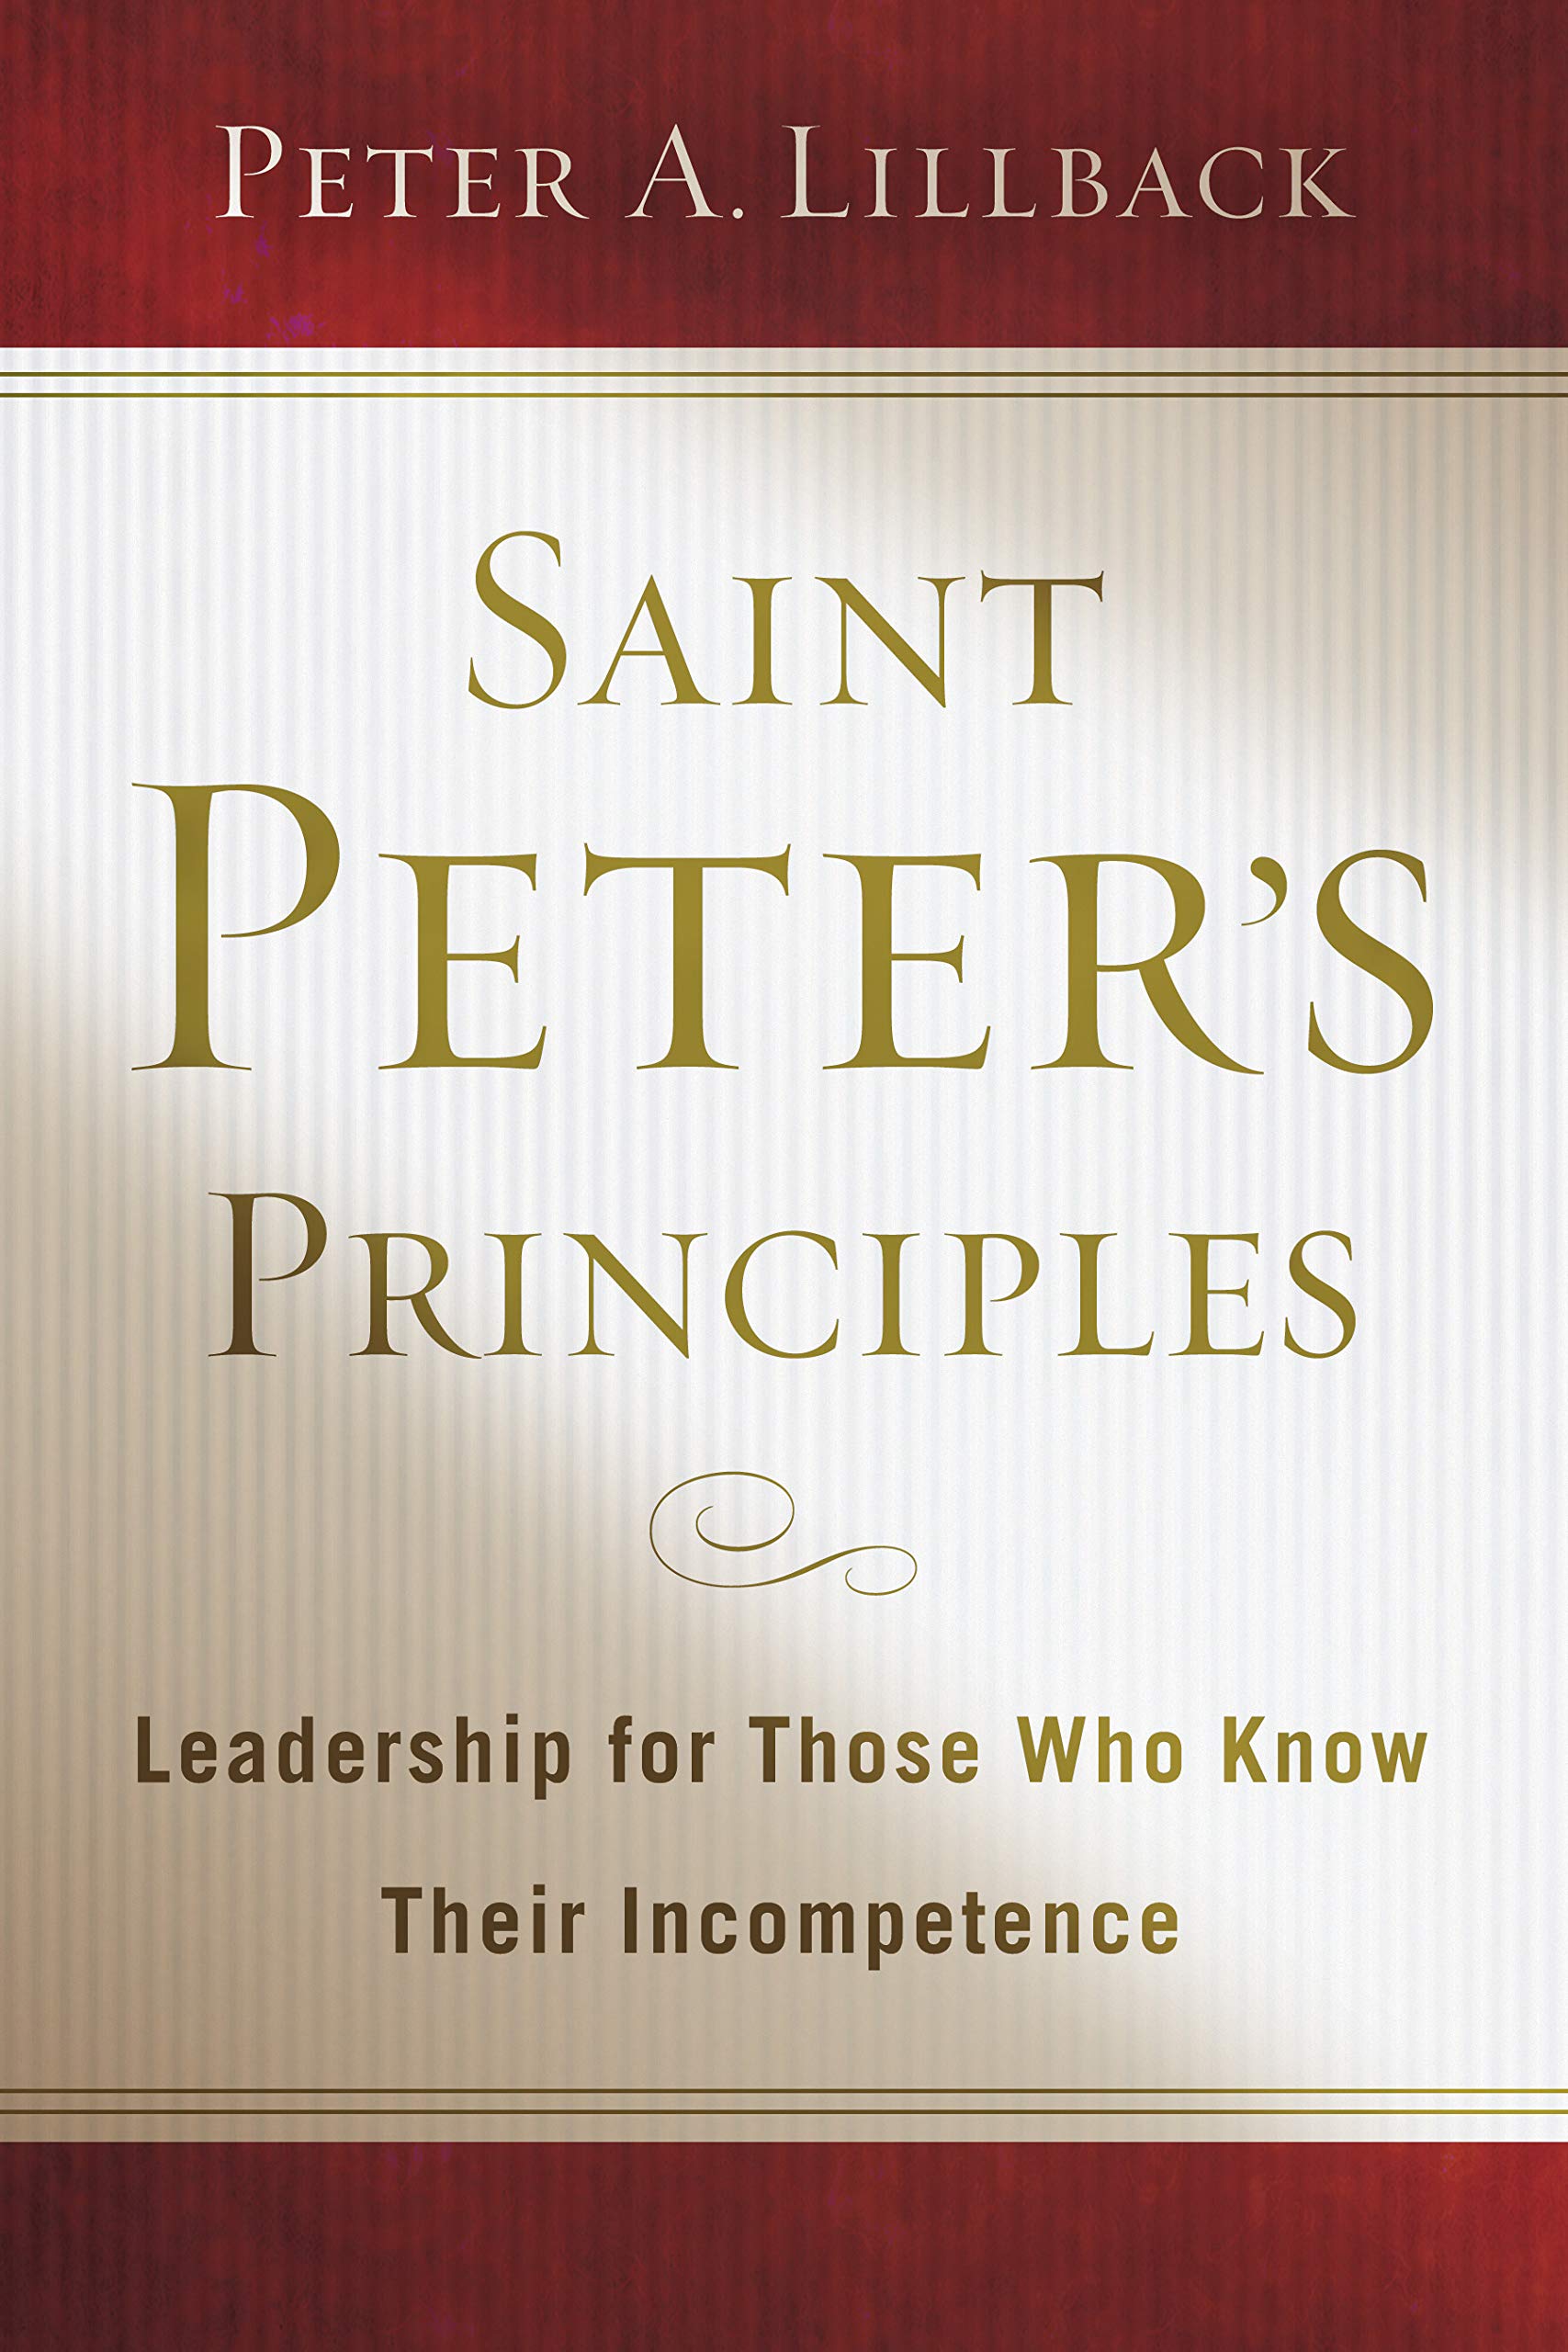 Book Notice: SAINT PETER’S PRINCIPLES: LEADERSHIP FOR THOSE WHO ALREADY KNOW THEIR INCOMPETENCE, by Peter A. Lillback